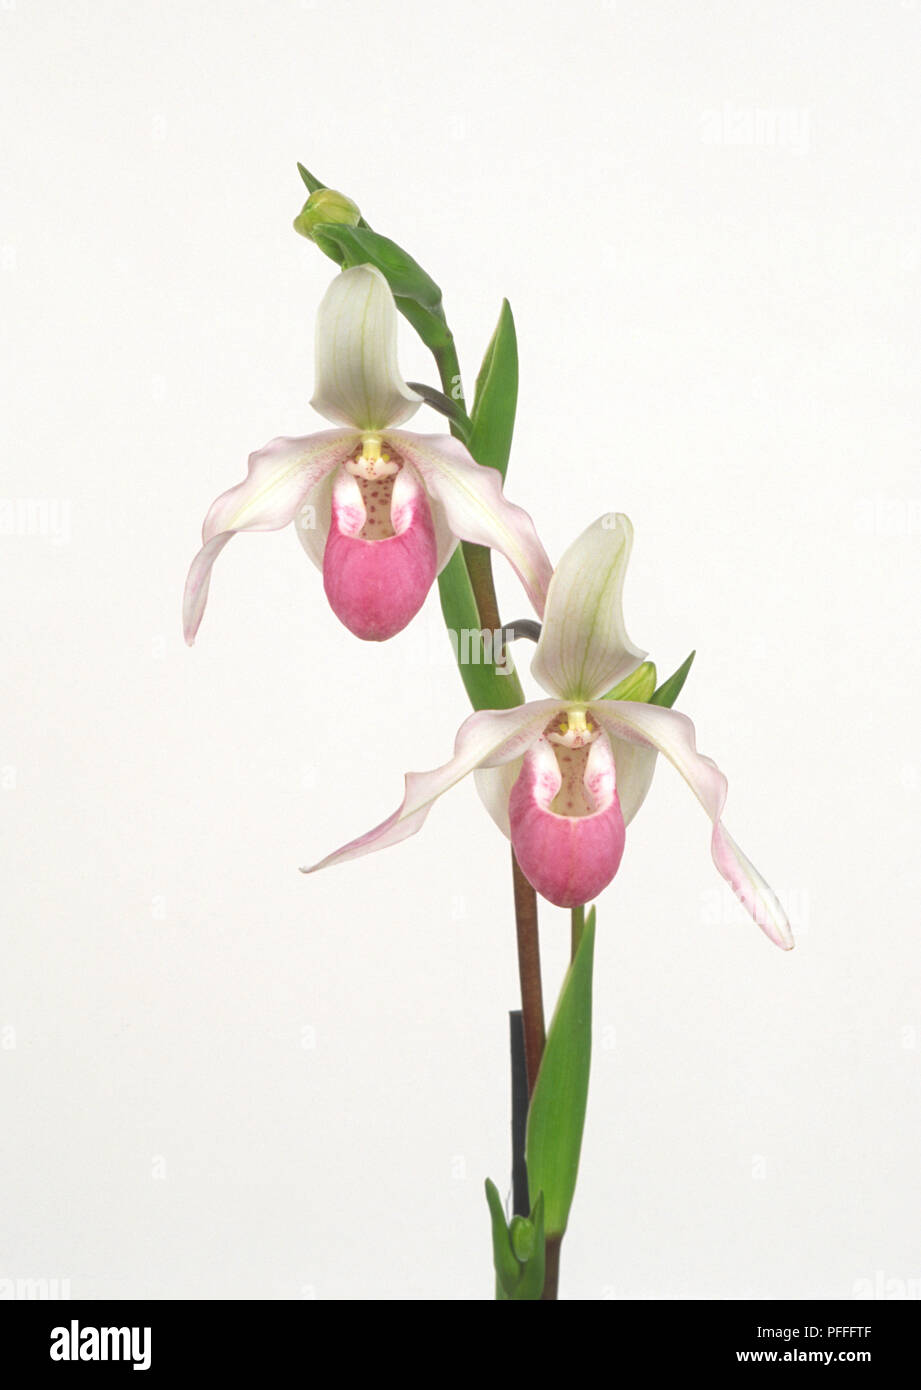 Phragmipedium sedenii, orchid showing two pink and white flower heads, close-up Stock Photo